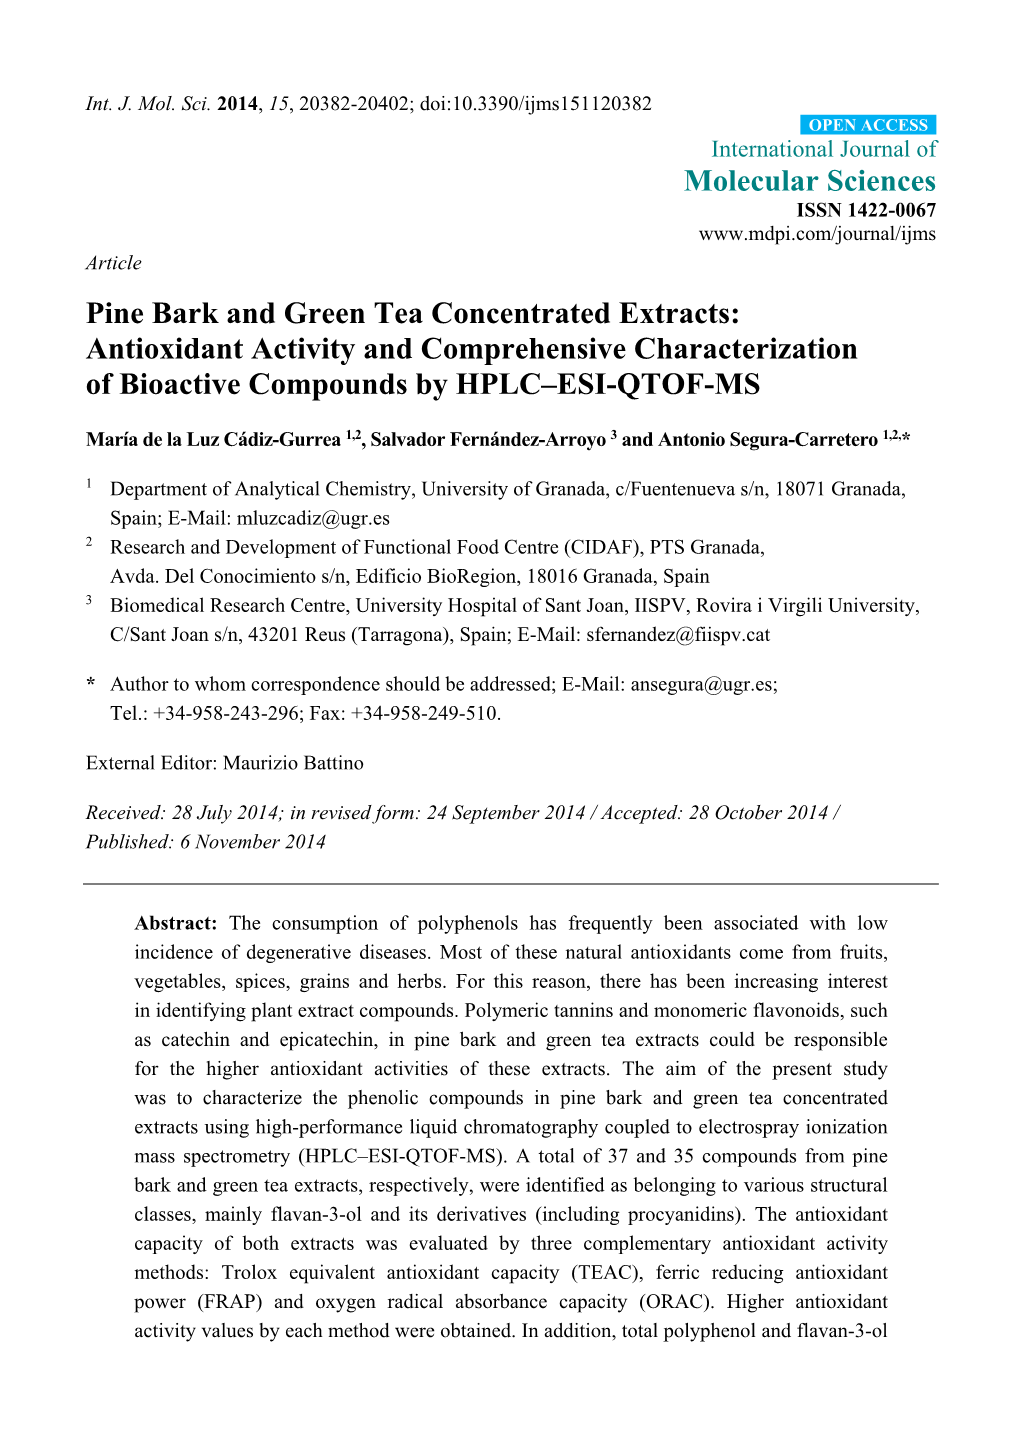 Pine Bark and Green Tea Concentrated Extracts: Antioxidant Activity and Comprehensive Characterization of Bioactive Compounds by HPLC–ESI-QTOF-MS